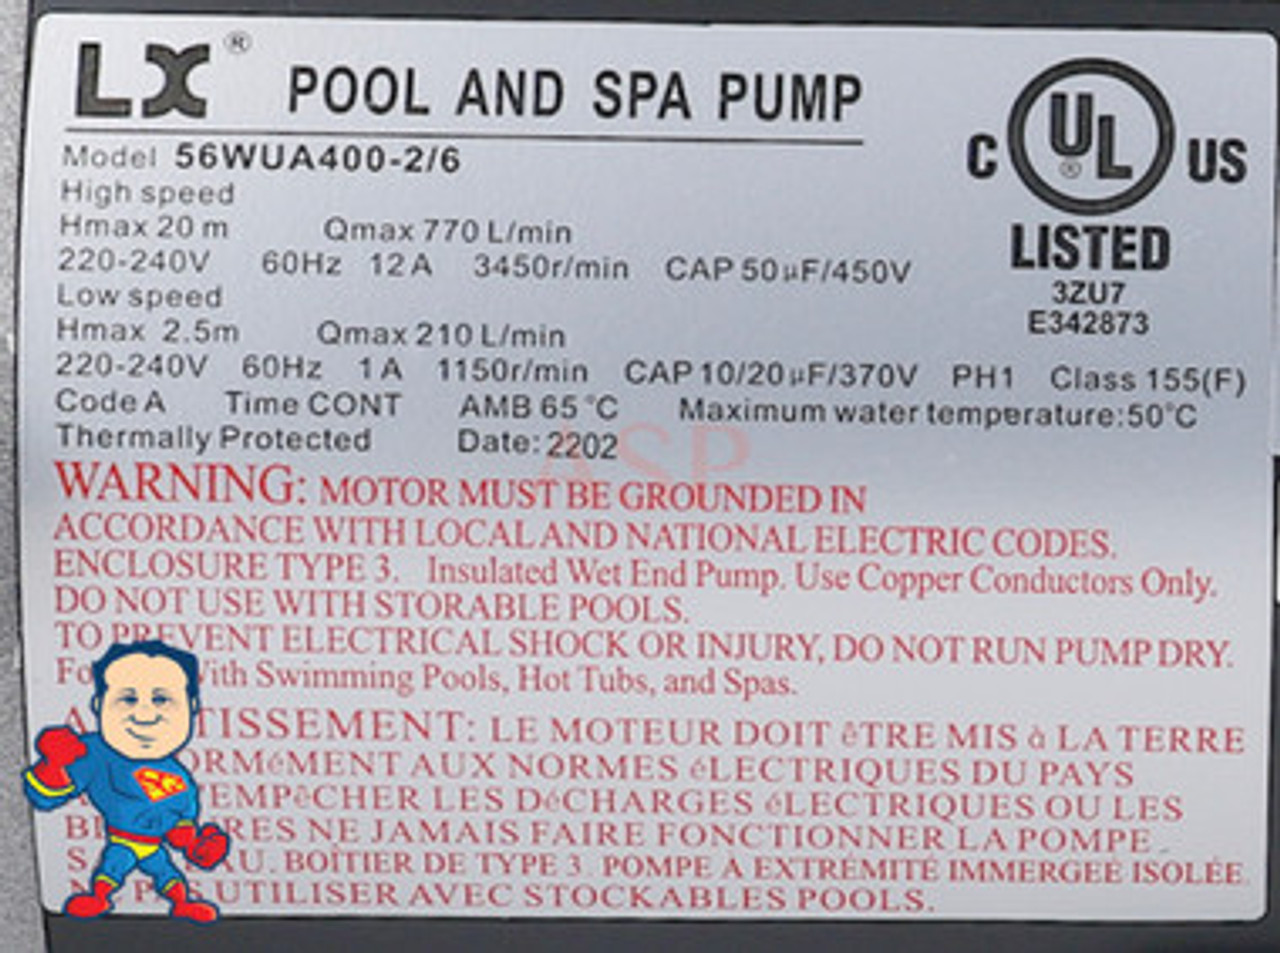 Note the 56WUA400-2/6 make sure you old pump has that number and is 2" x 2" and you have the correct pump..